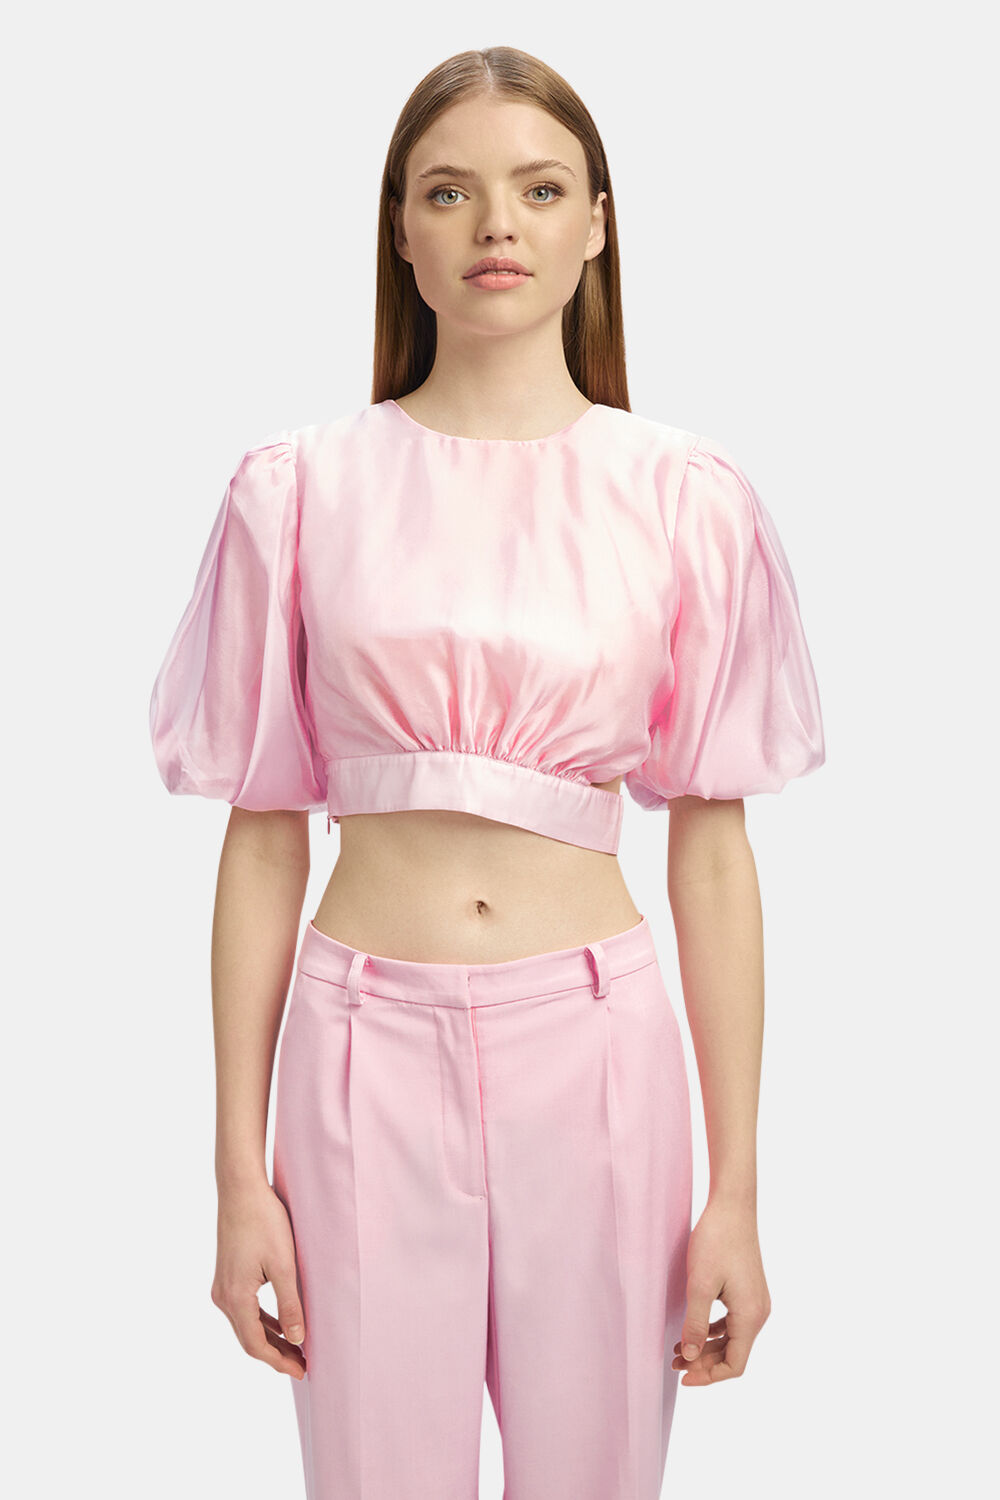 ENYA ORGANZA TOP in colour SOFT PINK